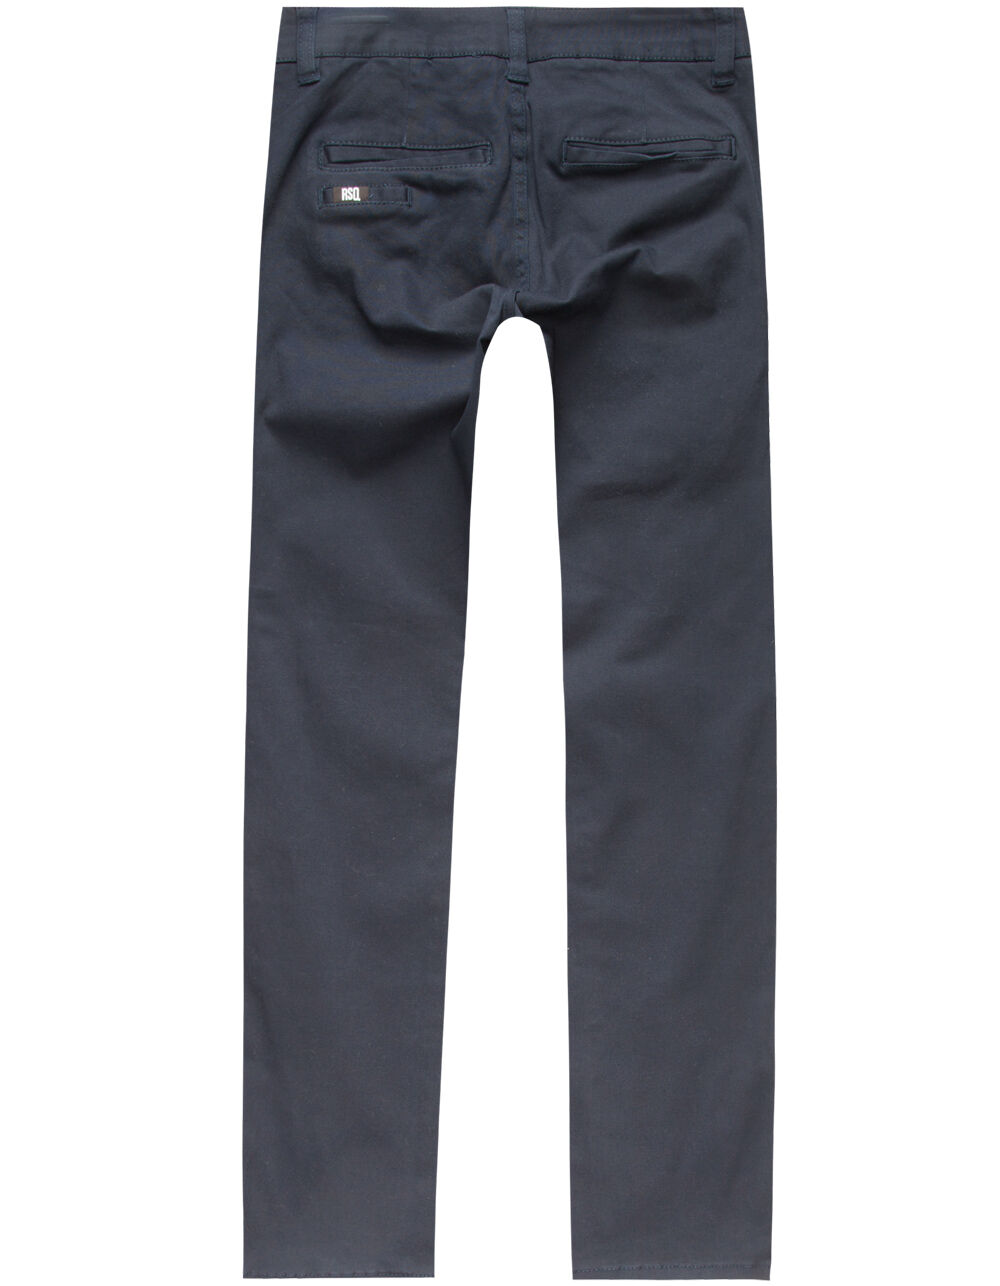 RSQ London Boys Skinny Chino Pants image number 1